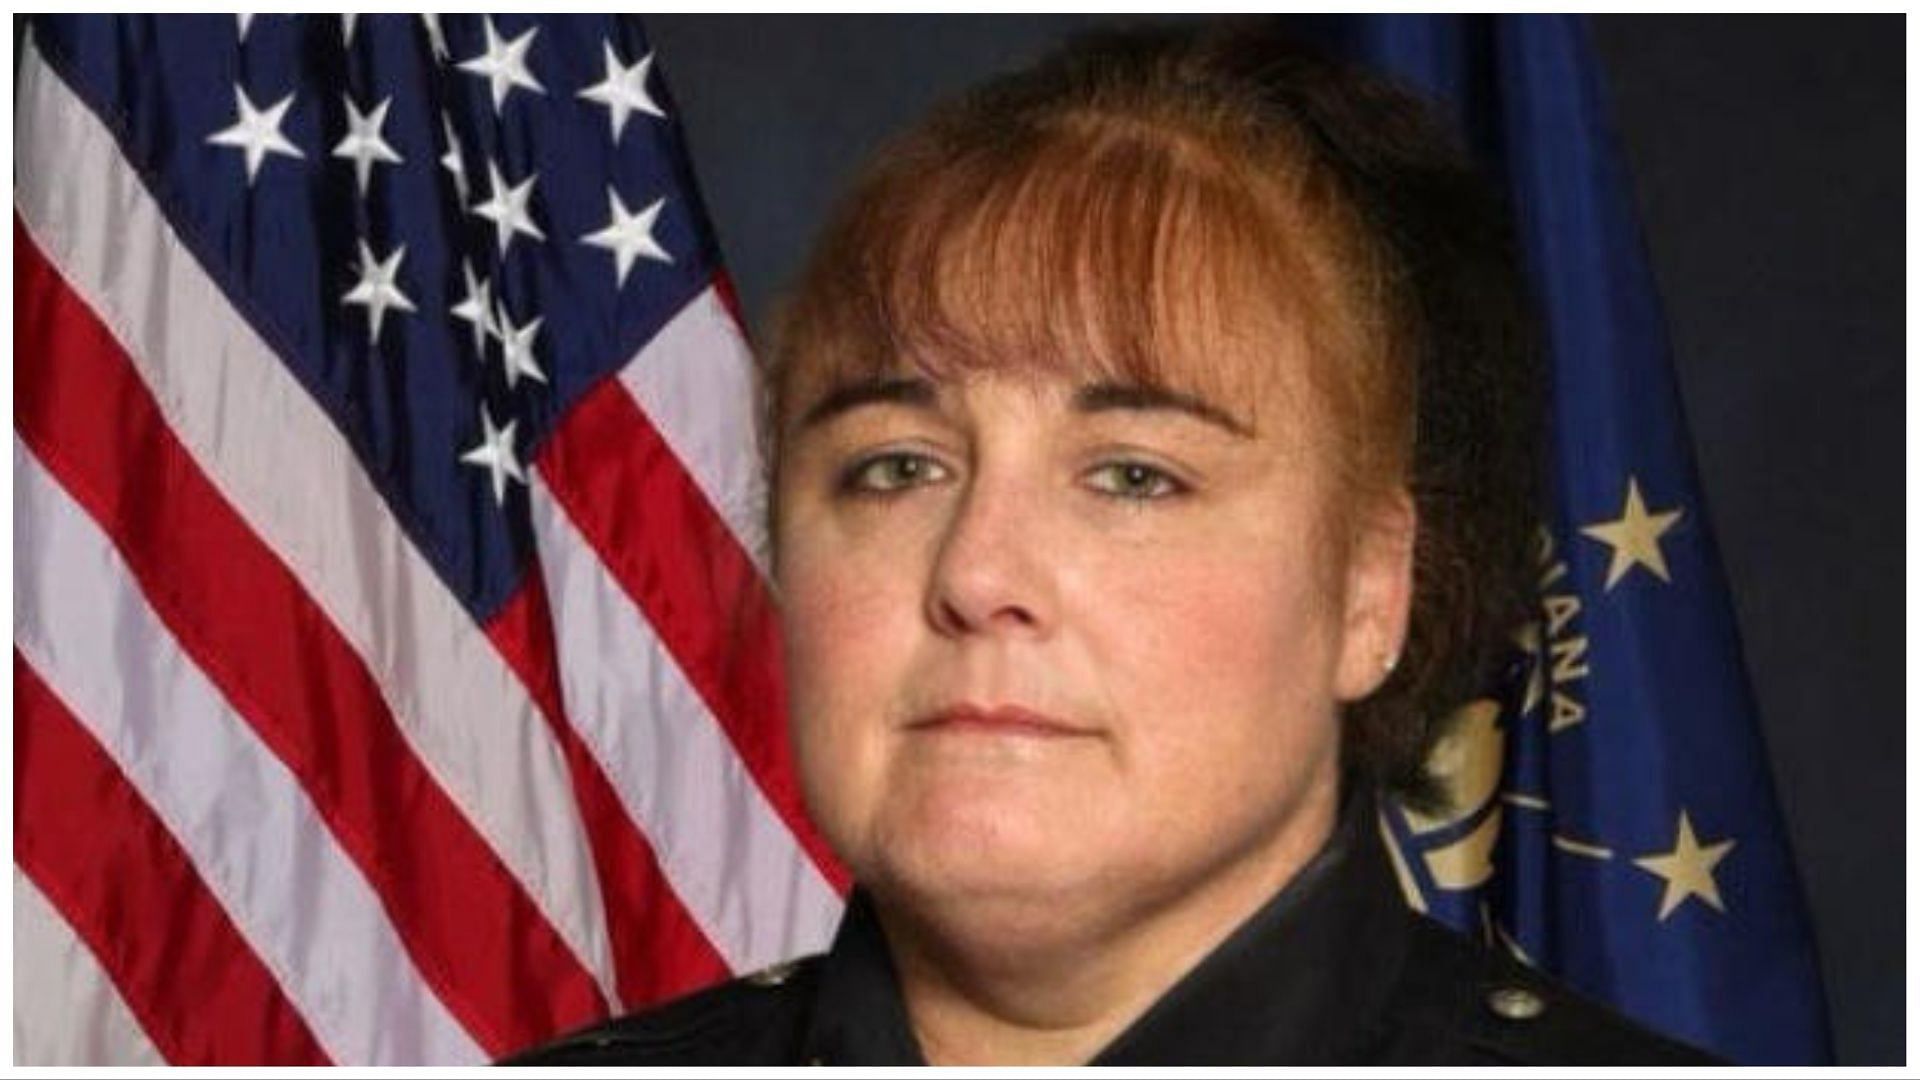 Sgt. Heather Glenn was allegedly shot to death by a suspect during an arrest, (Image via @bostonpolice/Twitter)